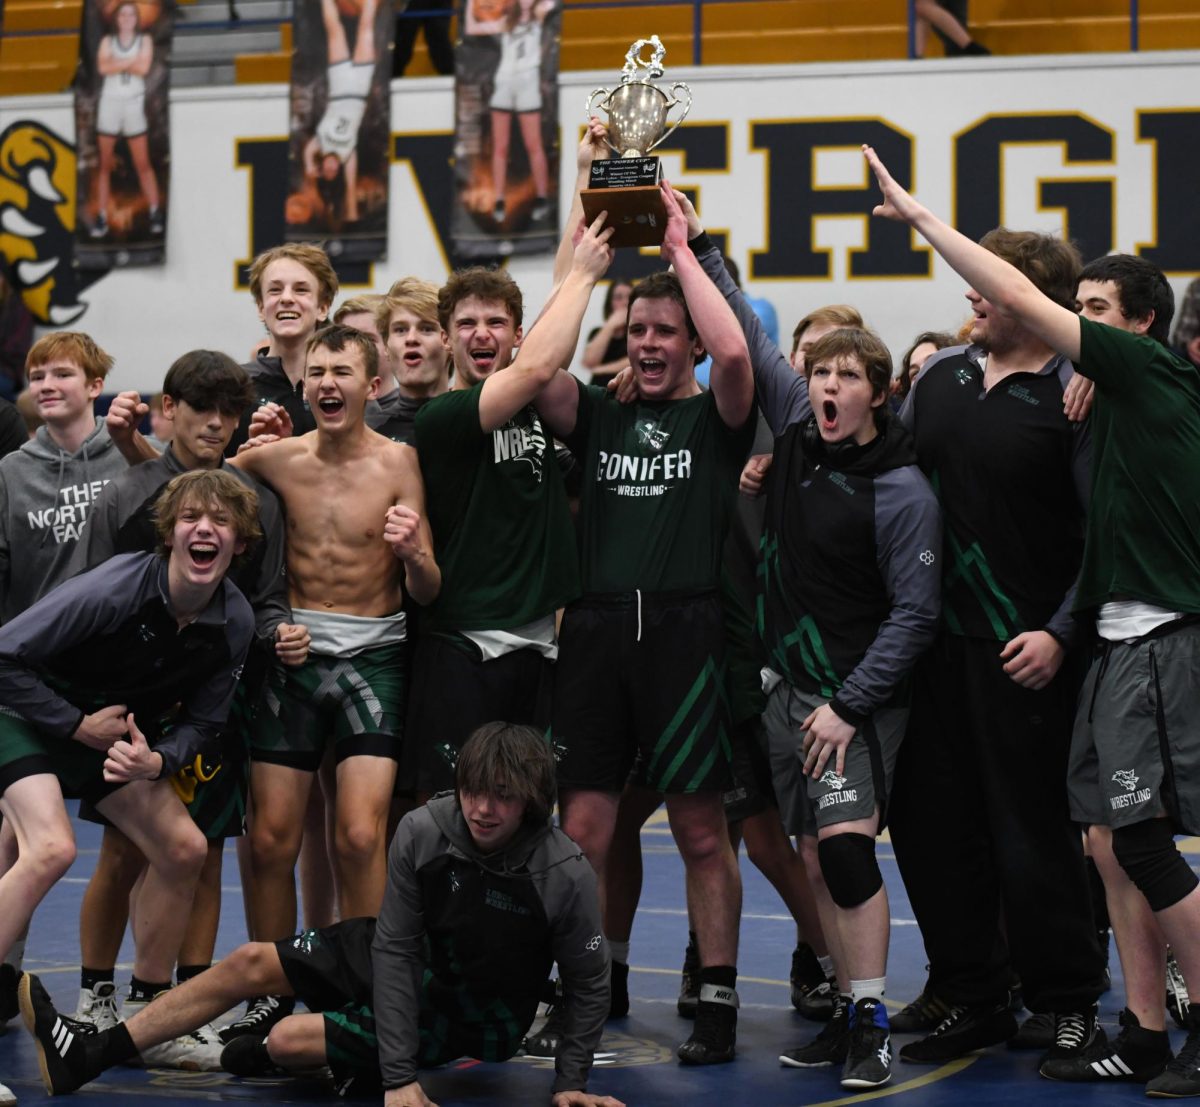 KING OF THE MOUNTAIN
Senior Trace Avery made his mark as one of the captains and brought the rivalry trophy home. It took nine years for the Power Cup to make its way back to Conifer. Avery made the decision to start wrestling his sophomore year and the hard work paid off his senior year.  “I wanted to try something new and wrestling was the perfect thing to try. It is a lot harder than it looks though. We lost to Evergreen so much in years past and it felt great to win with the team that we had this year,” Avery said.
